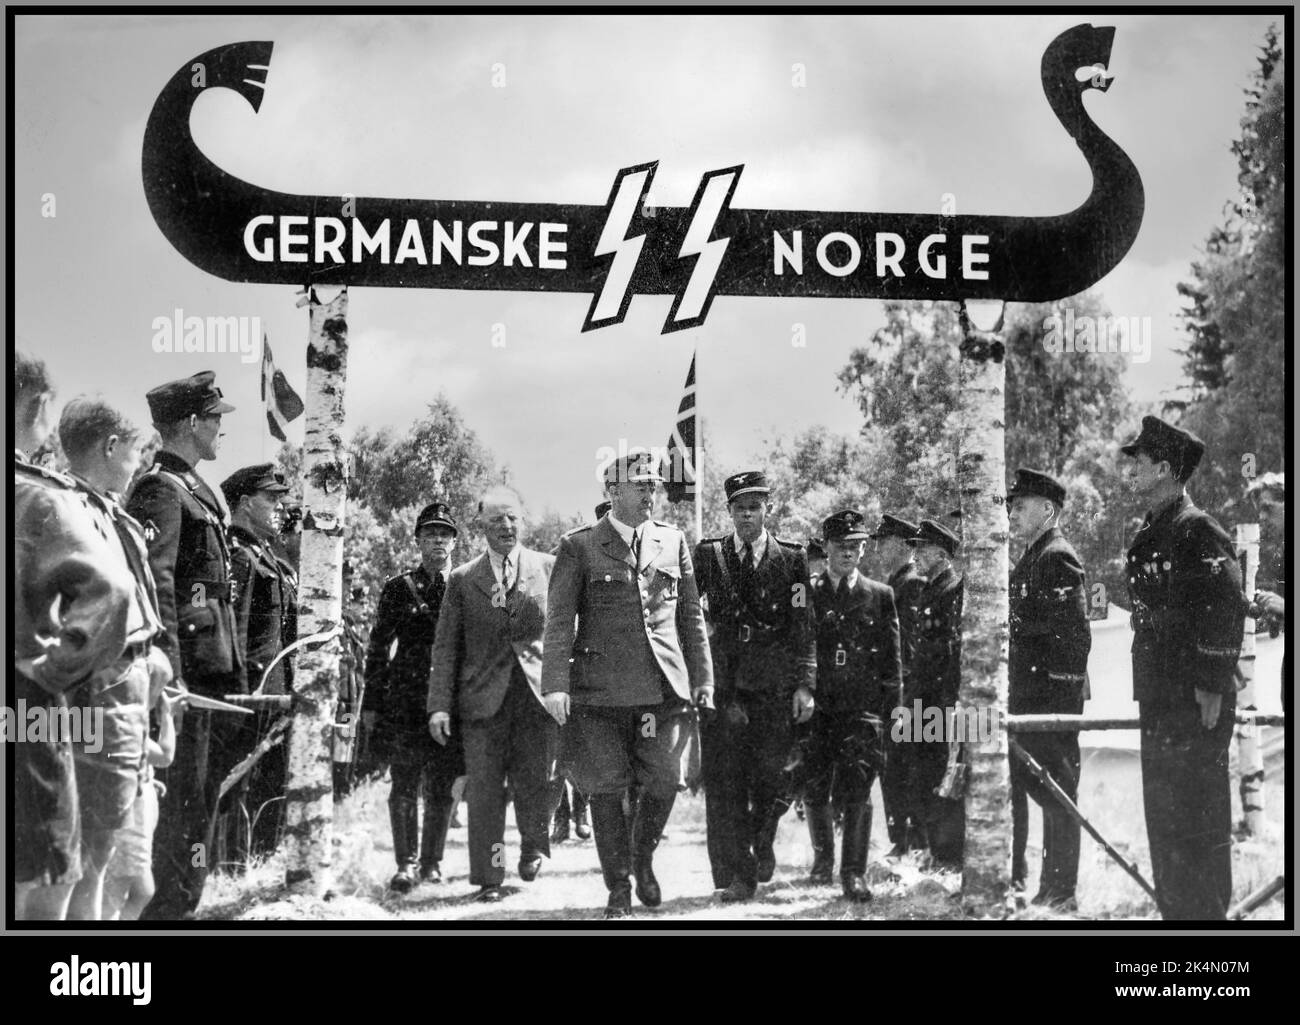 Vidkun Quisling visits the German SS Norway branch at the camp. In Filmavisen Norway on 28 June 1943 WW2 World War II Second World War Quisling Germanske SS Norges  Nasjonal Samling, abbreviated NS, was a Norwegian political party founded by Vidkun Quisling in 1933 and dissolved upon liberation in 1945. The party eventually aligned itself closely with the ideology of National Socialism and became a collaborator support organization for the Nazi German occupation forces in Norway during the Second World War. Stock Photo